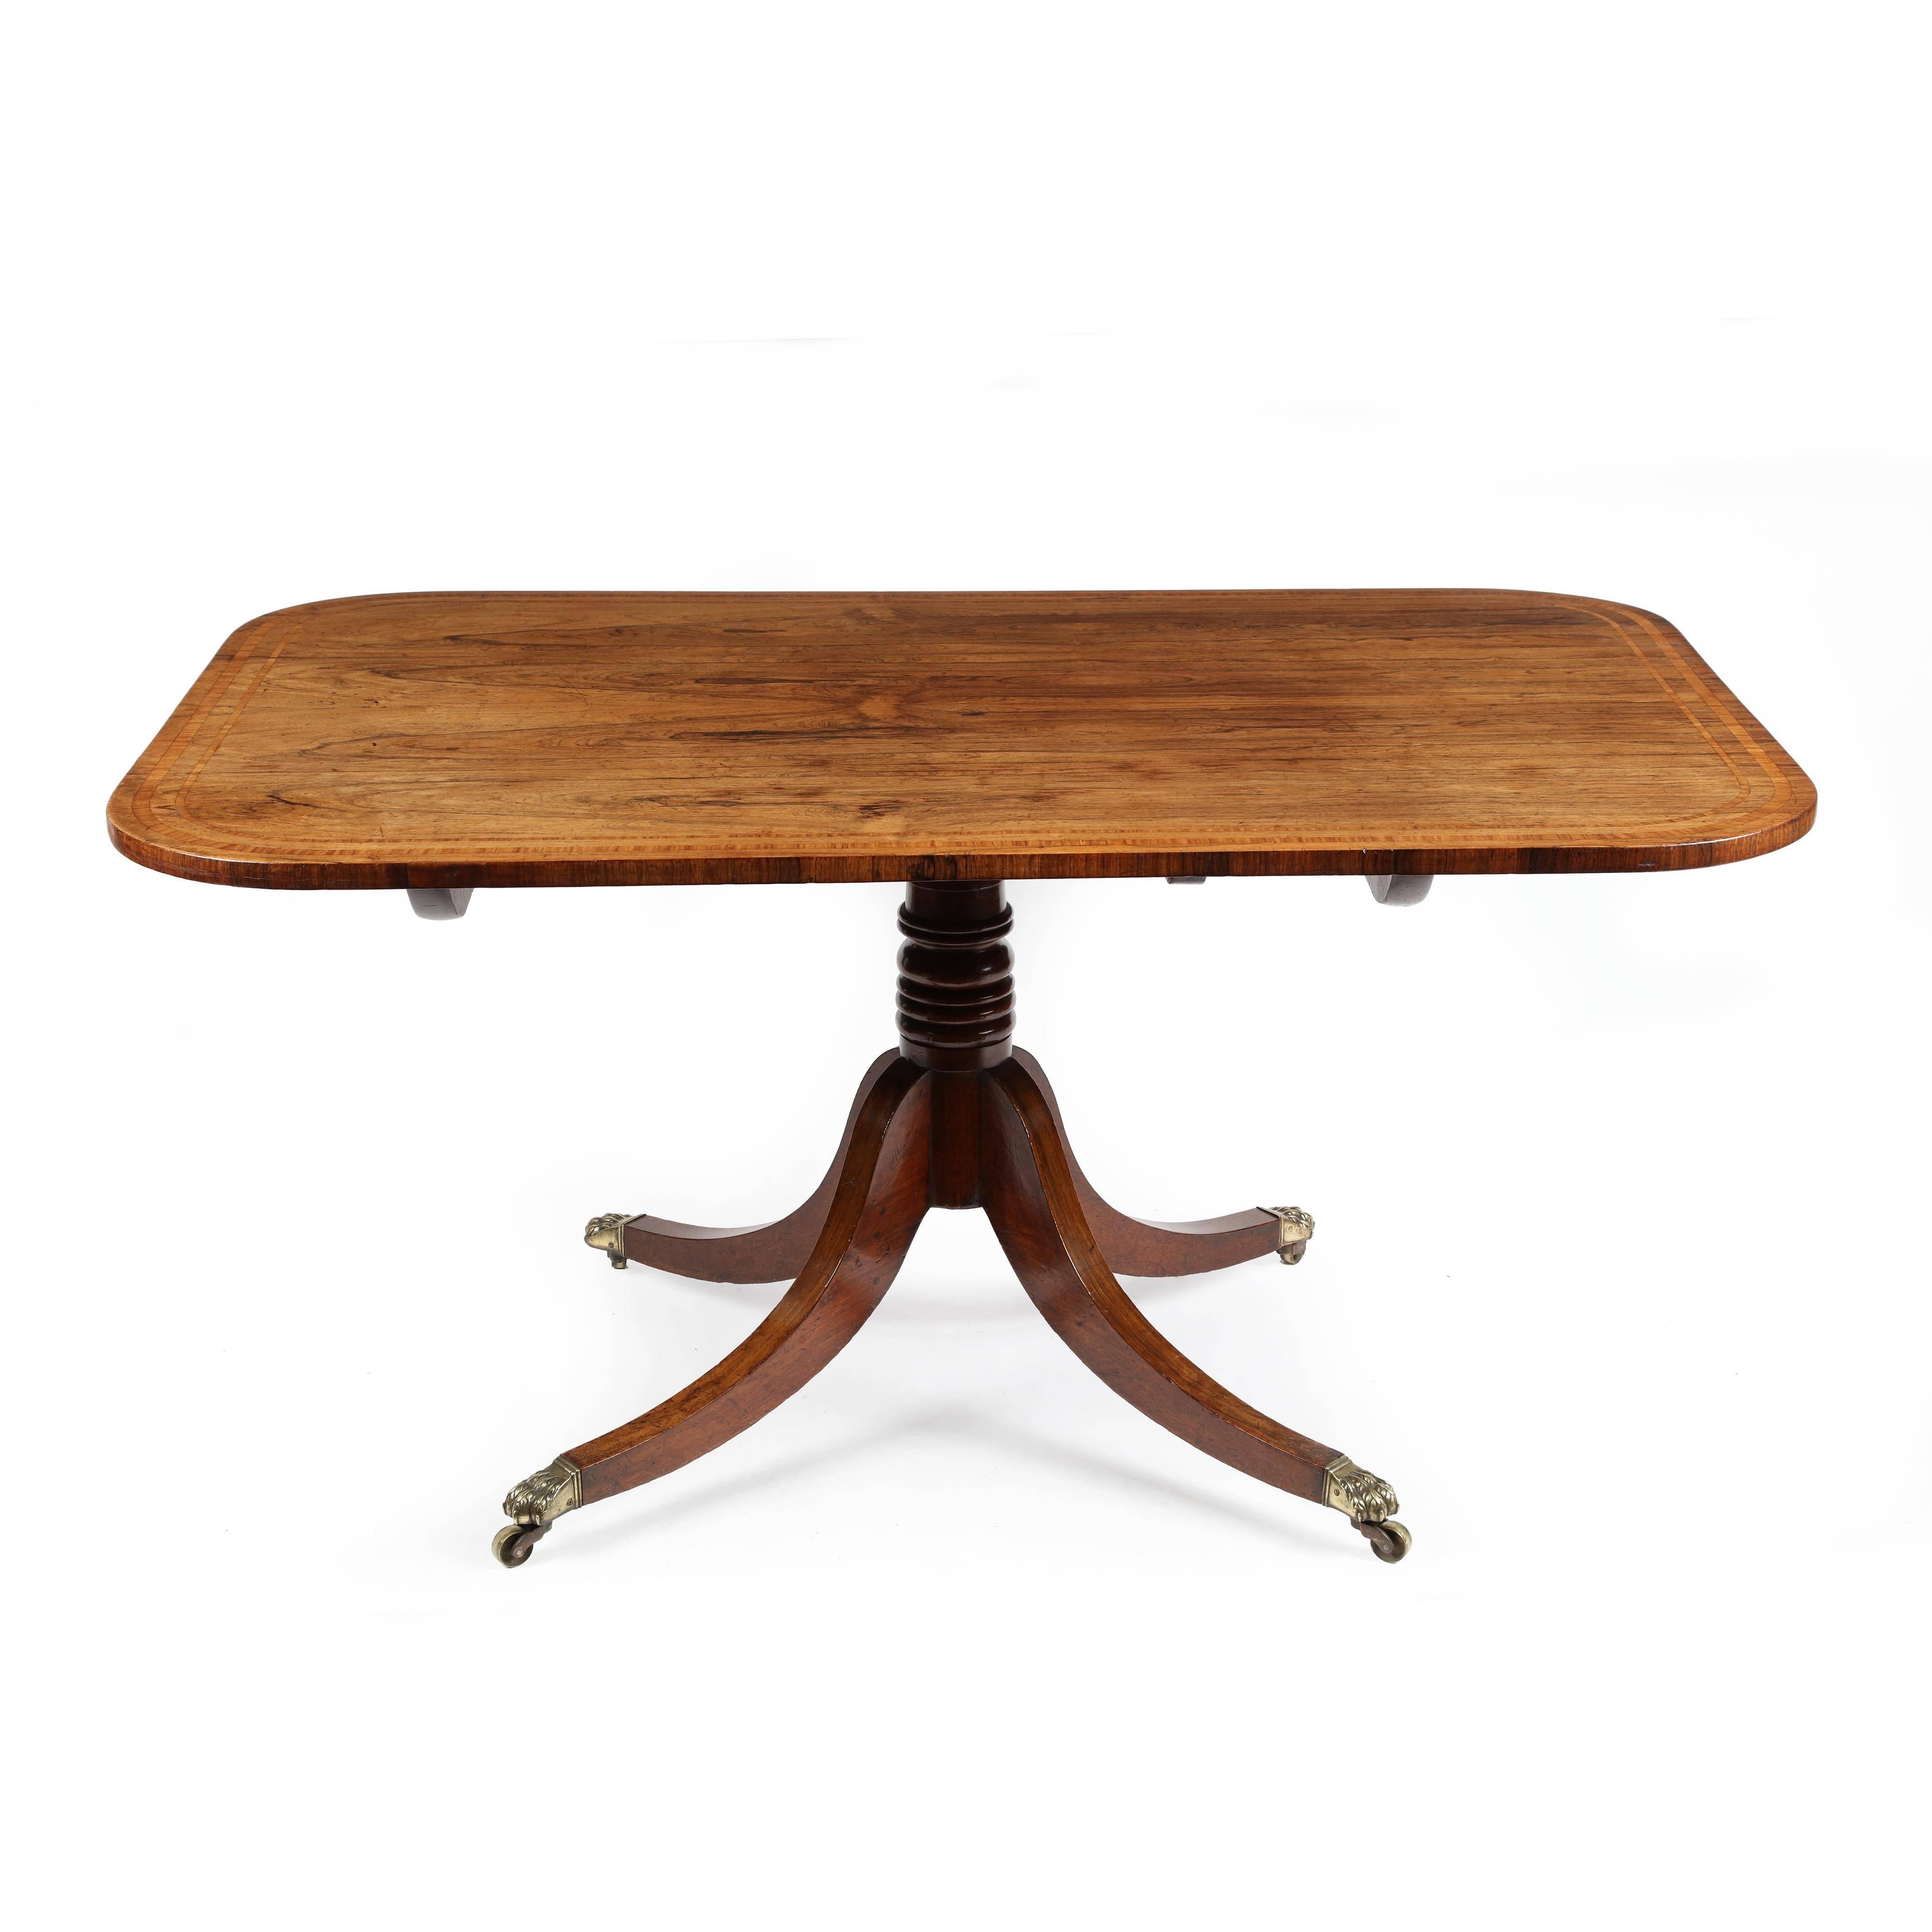 A fine George III Sheraton period rosewood and satinwood banded breakfast table. The rectangular top with rounded corners, laid with extremely well figured rosewood veneers onto a mahogany base and retaining excellent original surface, color and